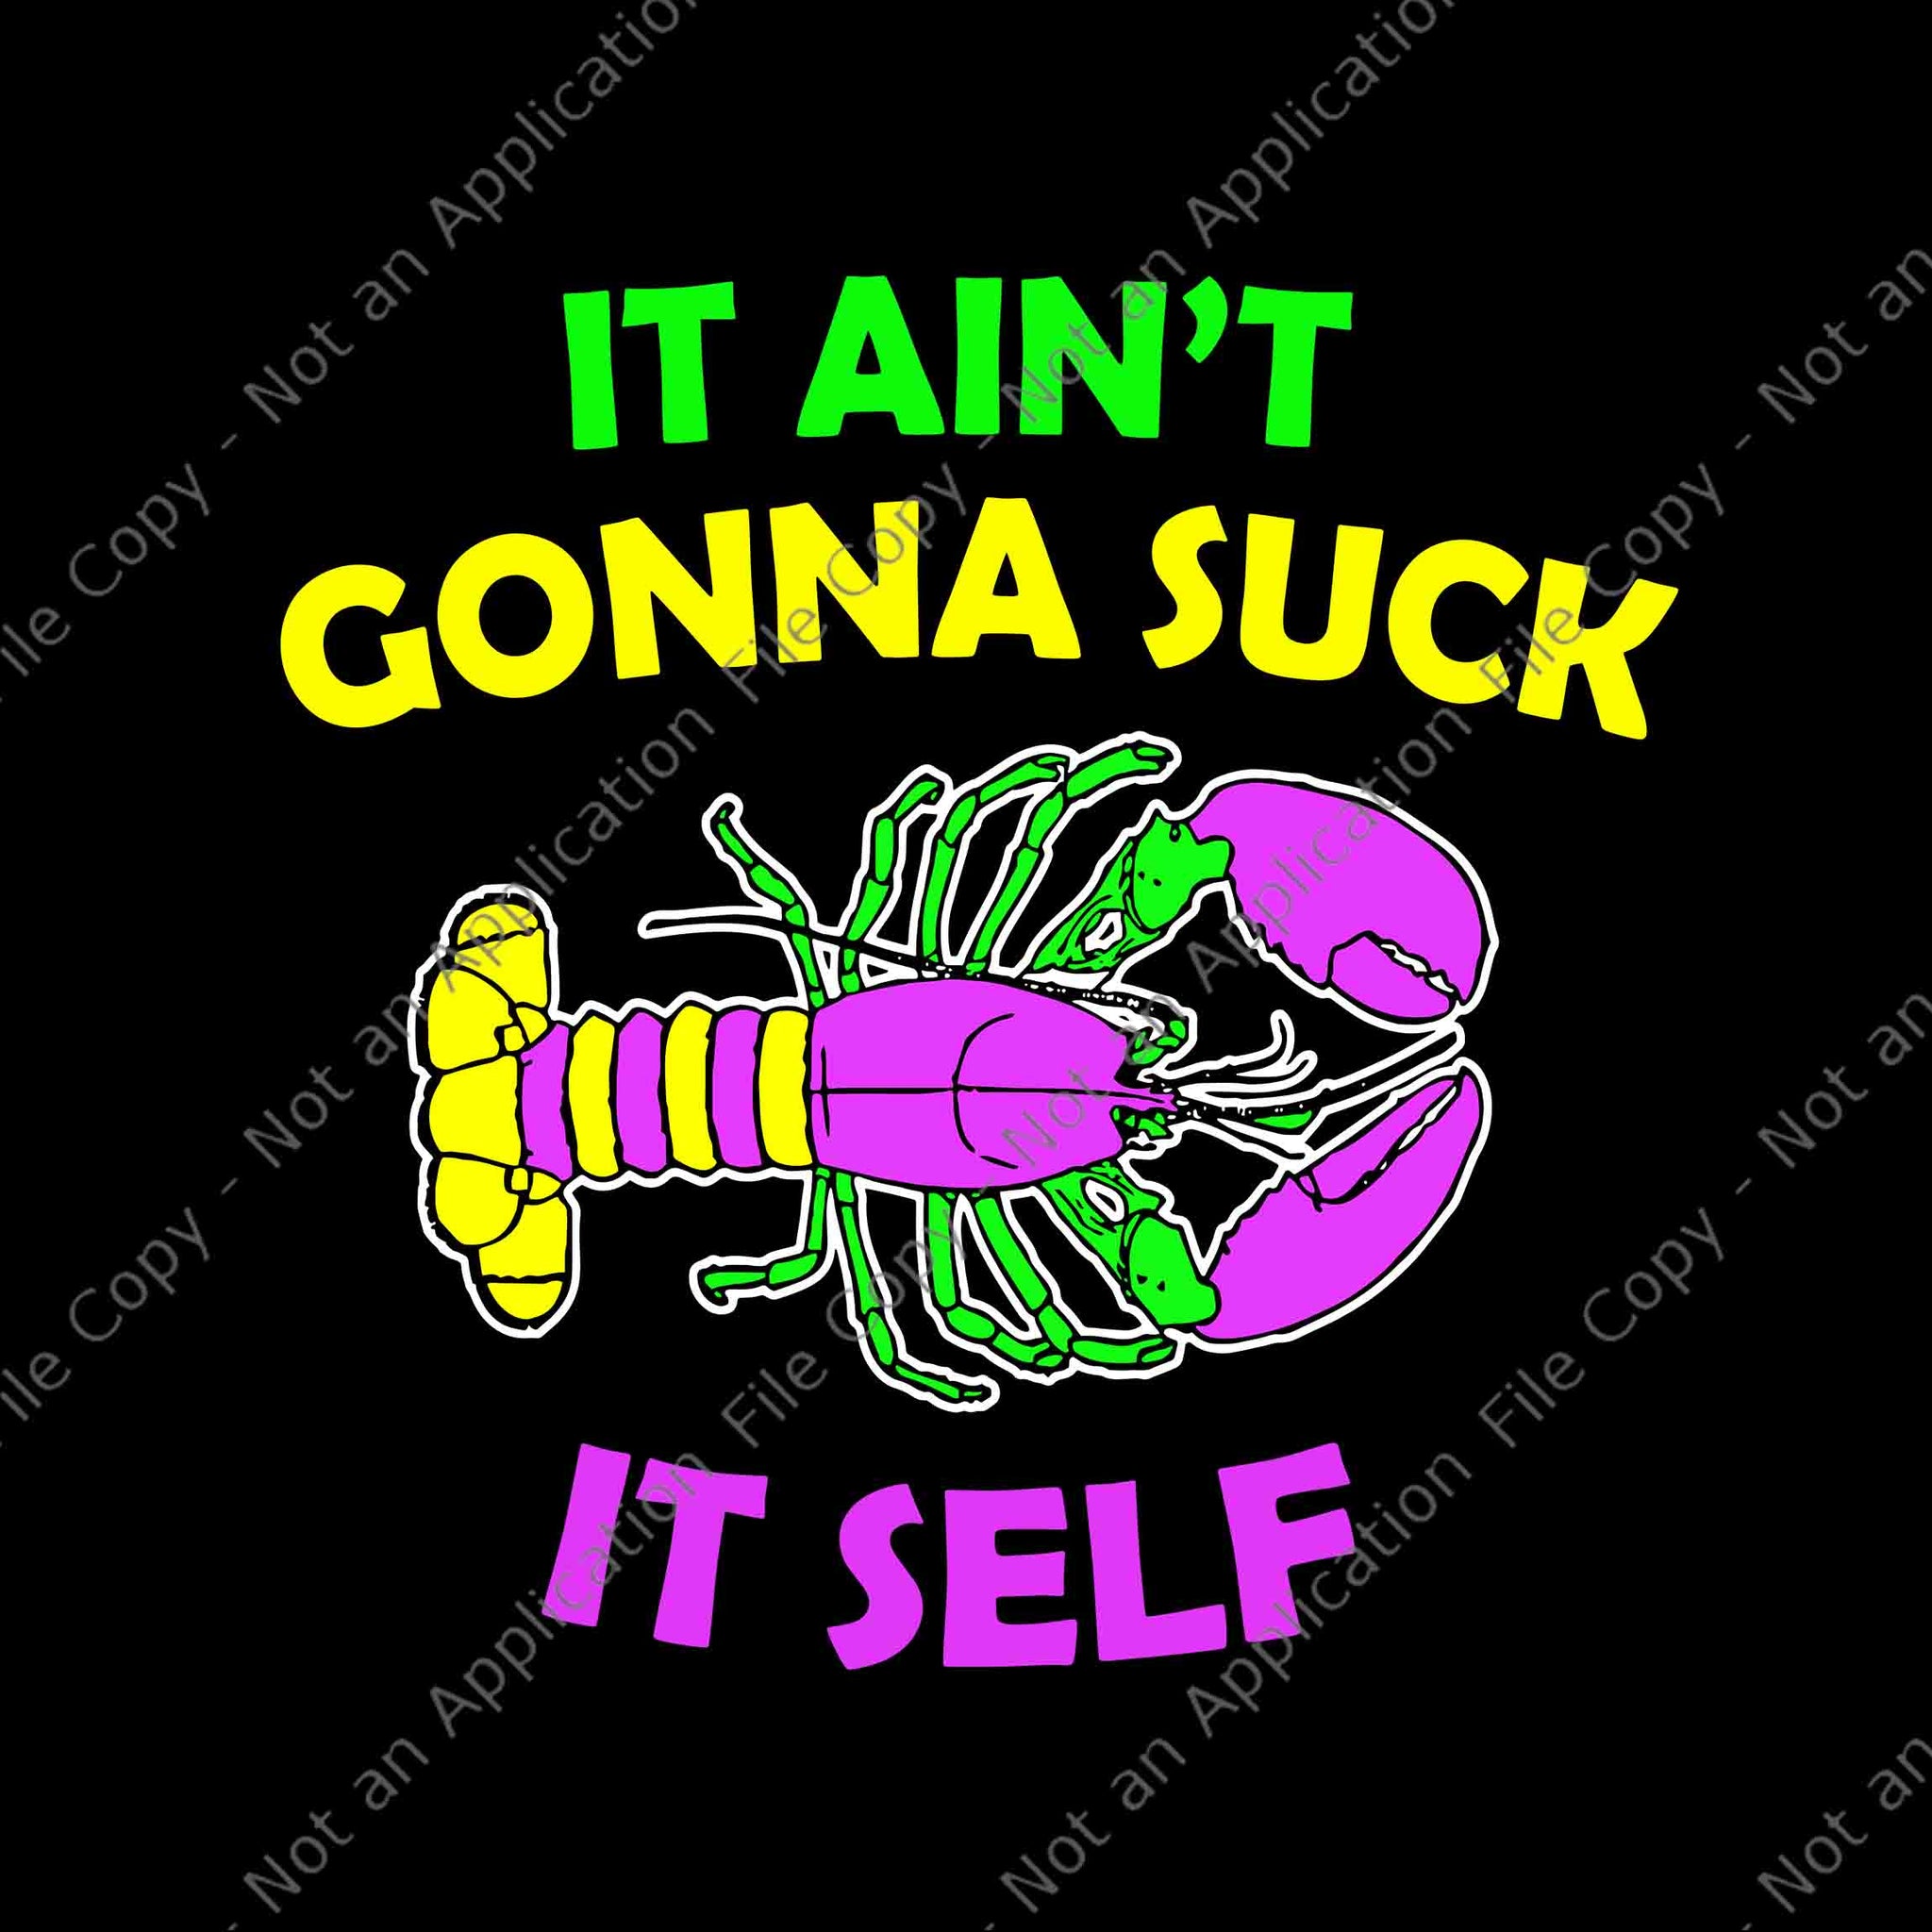 It Ain't Gonna Suck It Self Svg, Funny Aint Gonna Suck Itself Lobster Mardi Gras Svg, Mardi Gras Svg, Mardi Gras 2022 Svg